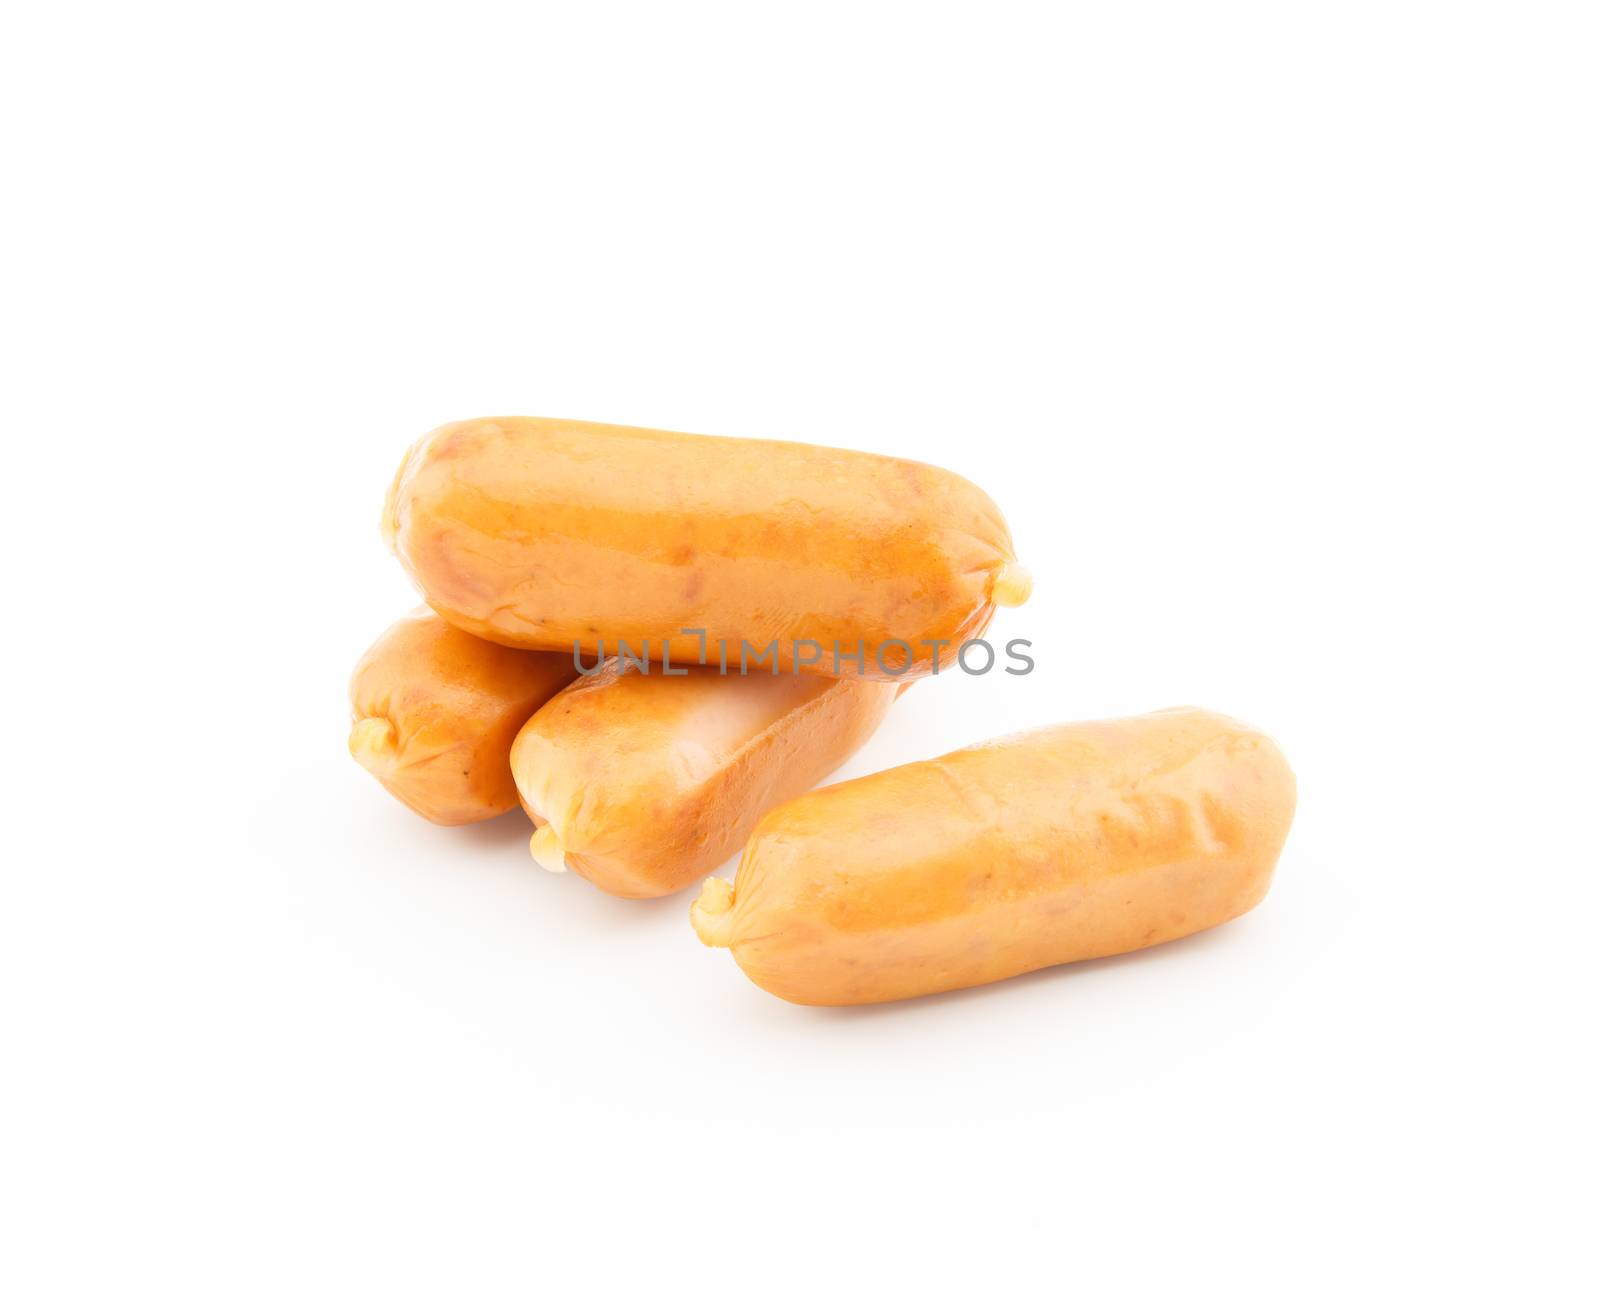 Cocktail sausages on white background by vitawin